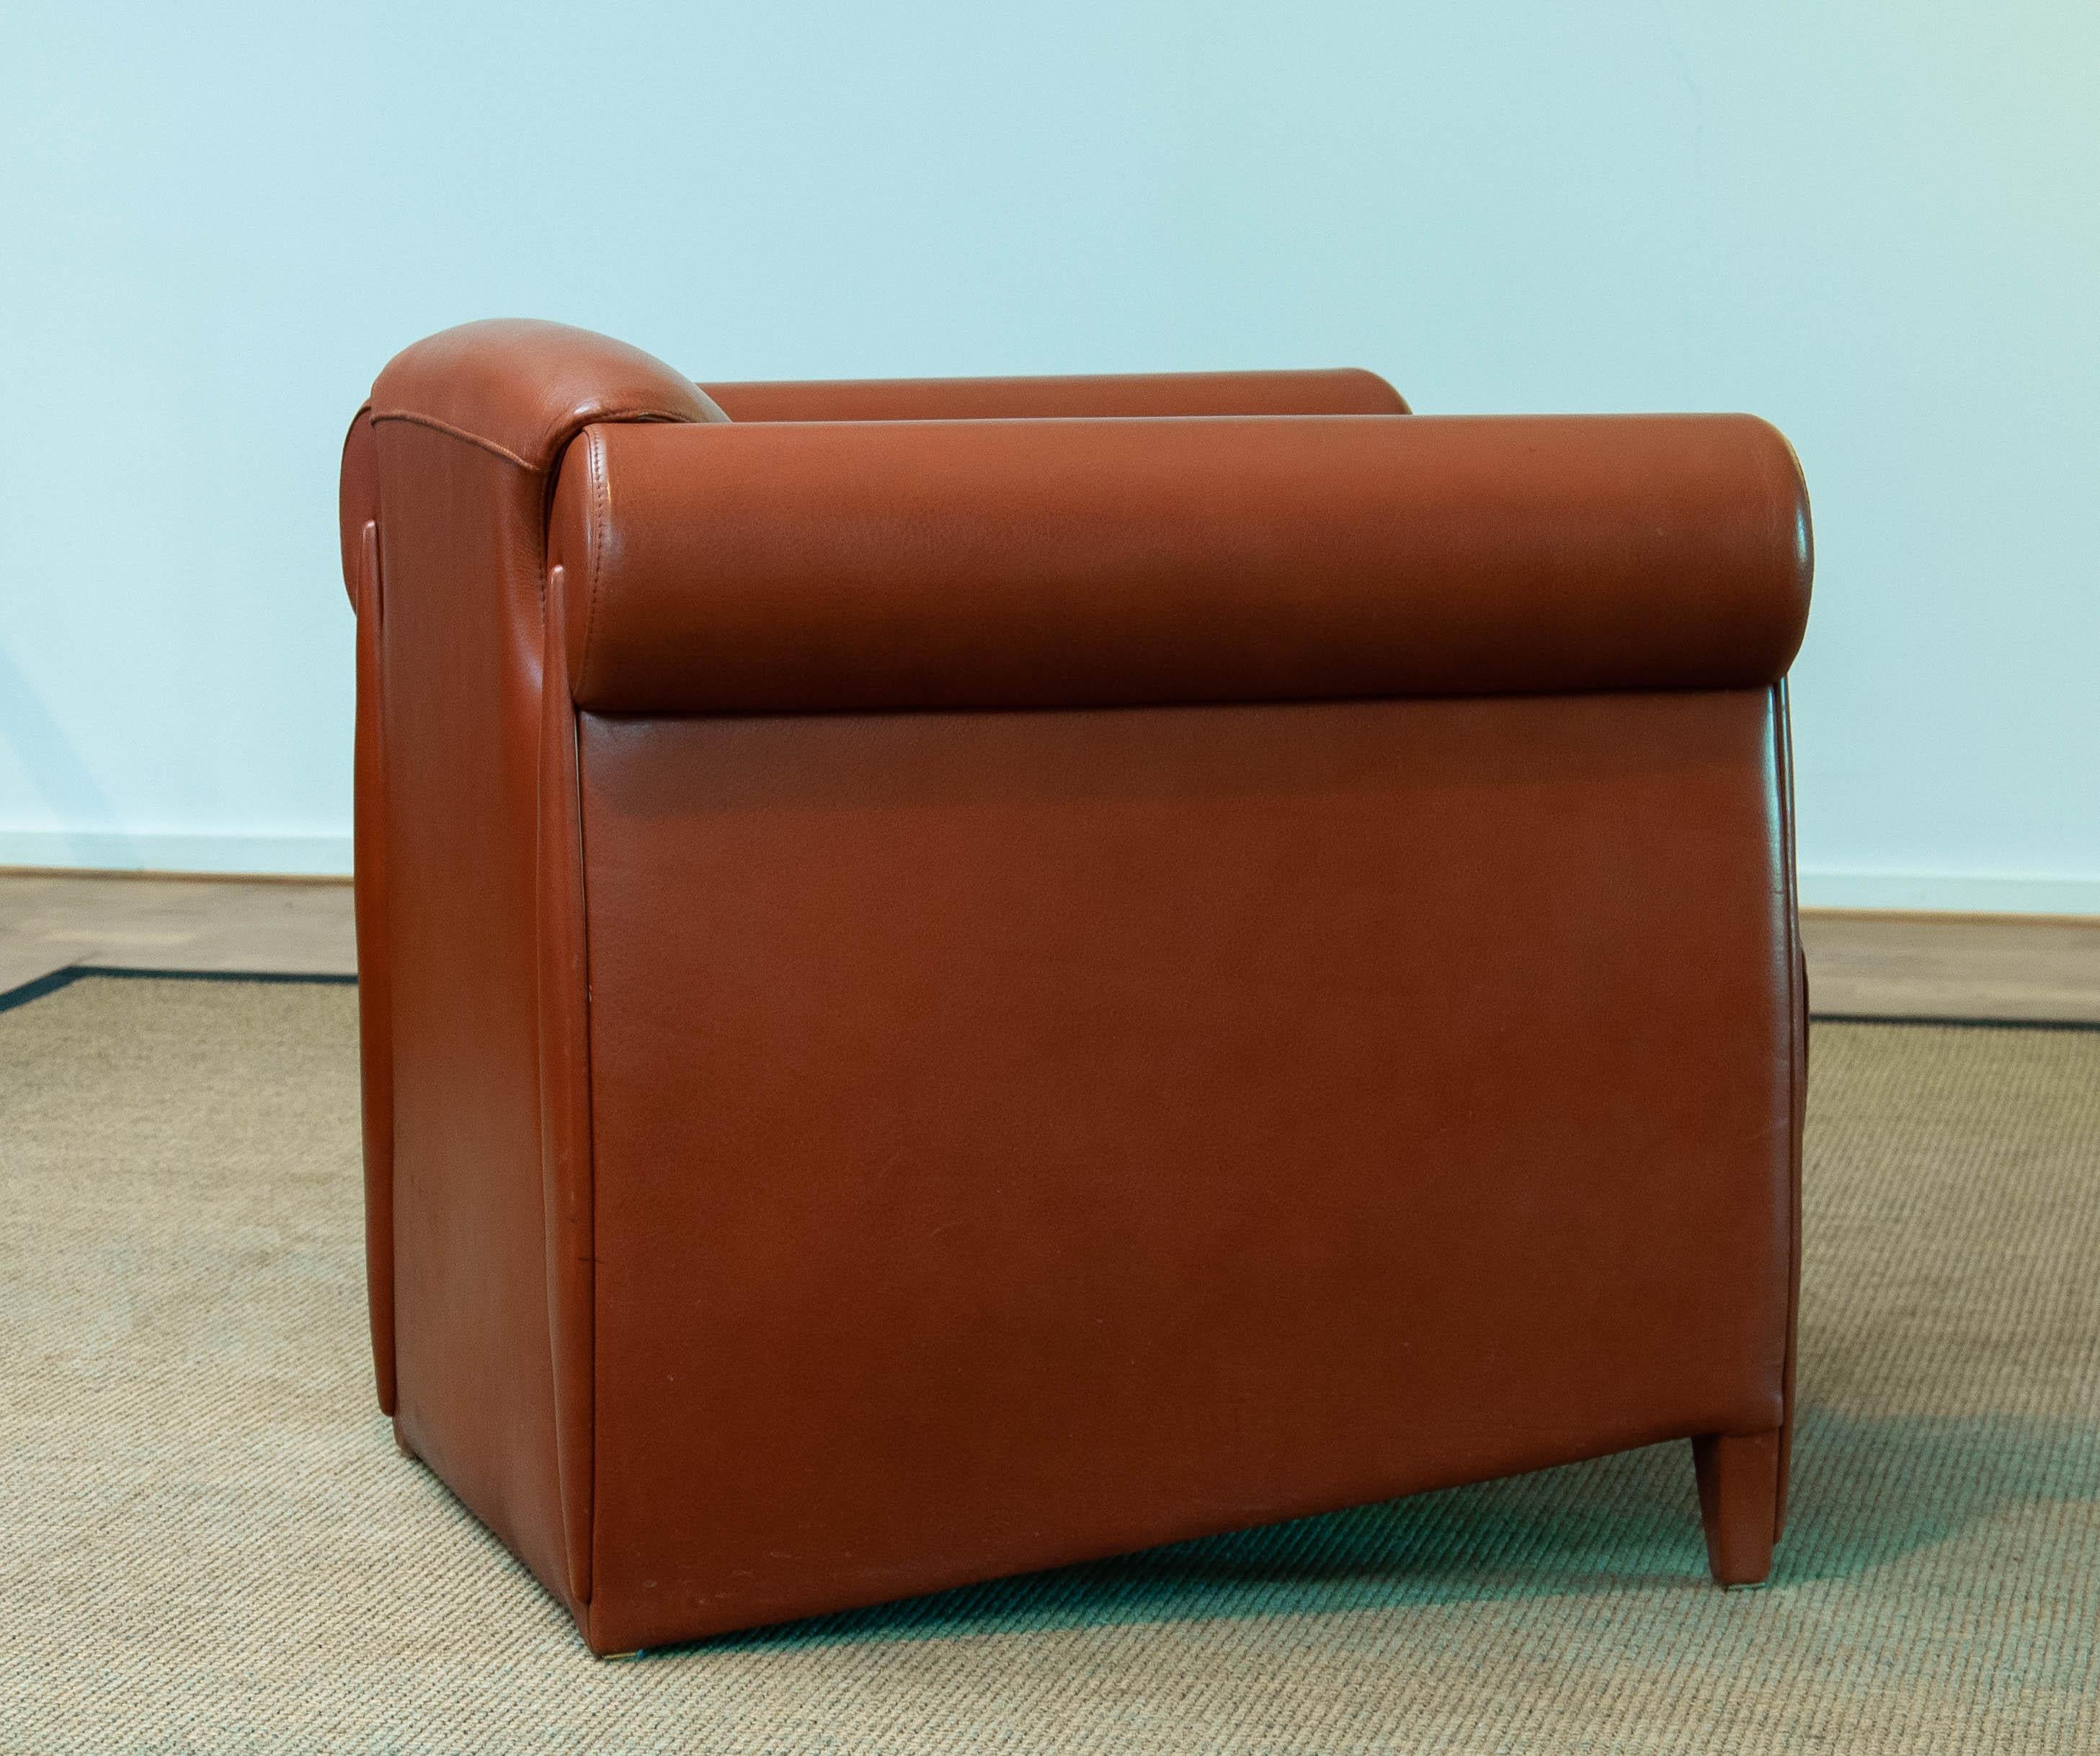 1980s Modern Lounge / Club Chair in Cognac Leather by Klaus Wettergren Denmark For Sale 3